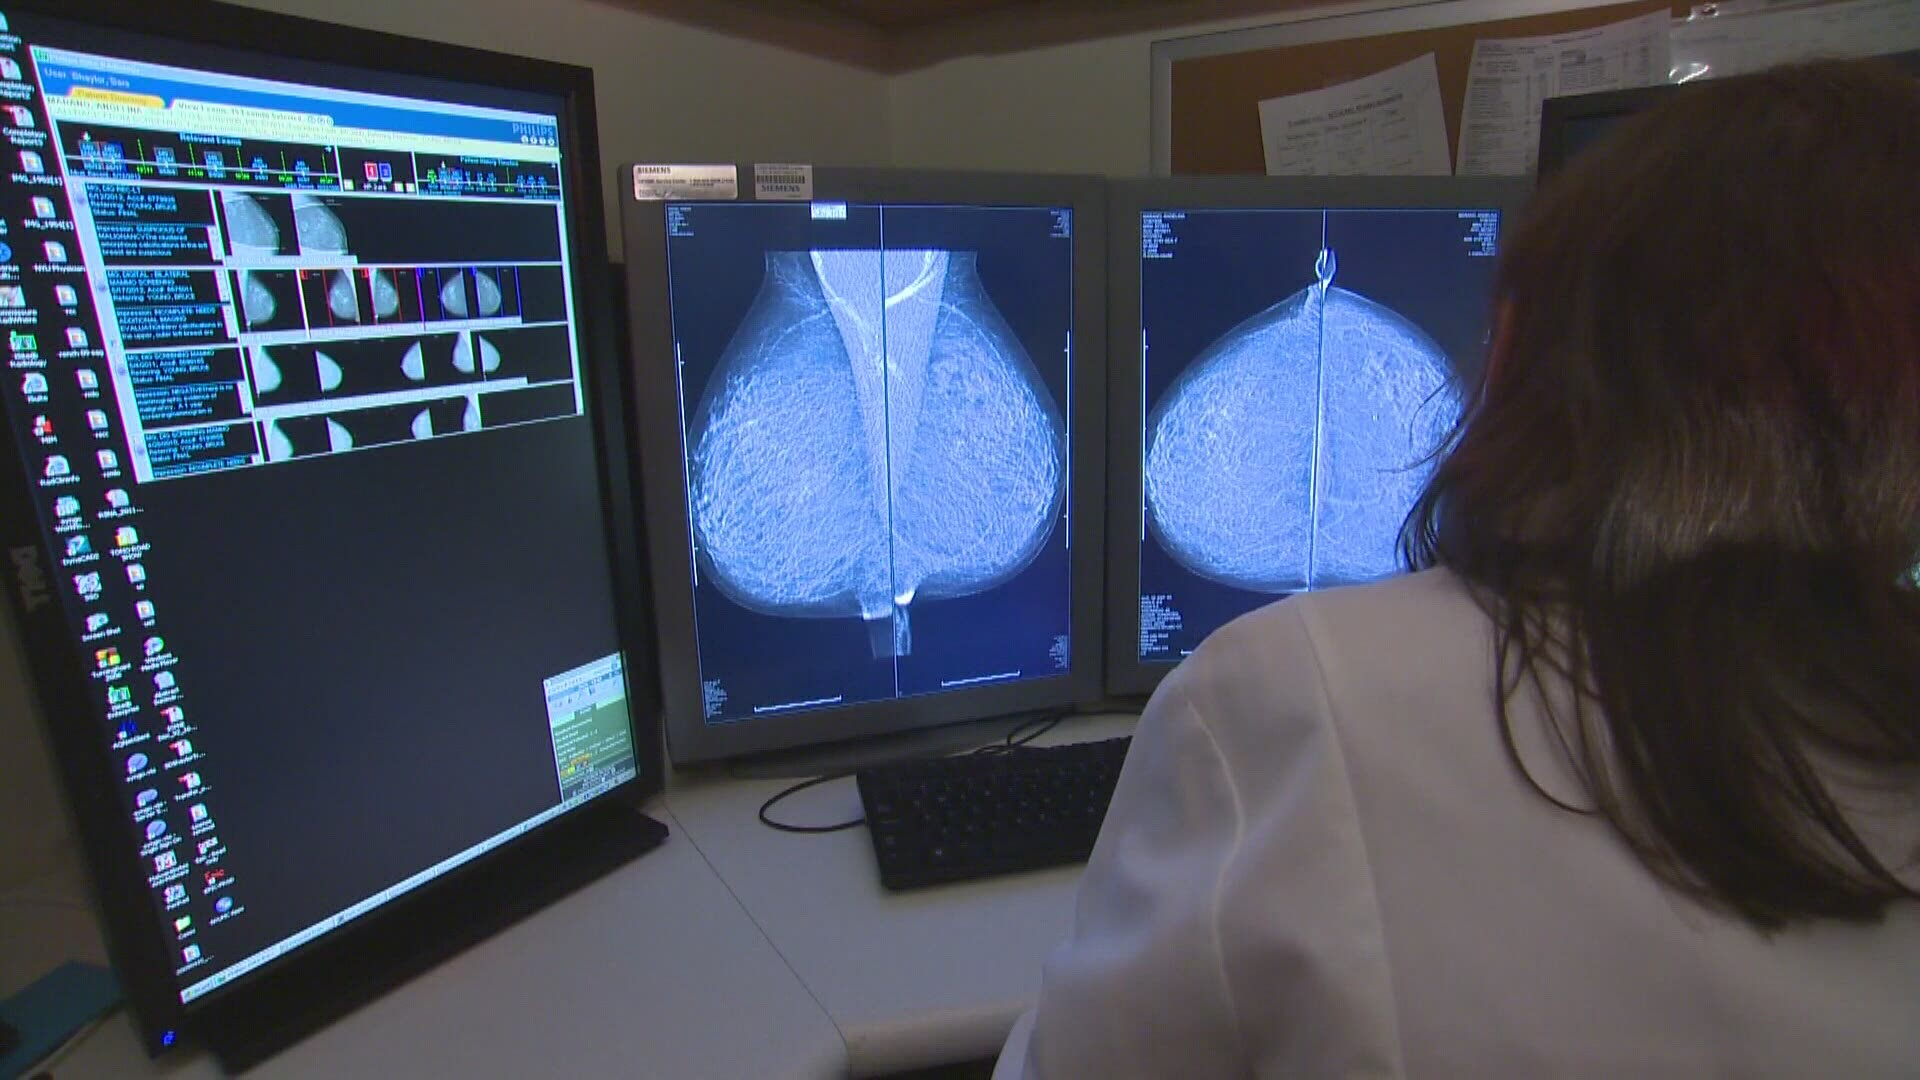 Dr. Laurie Birkholz suggests four small changes you can make to help prevent and detect breast cancer.